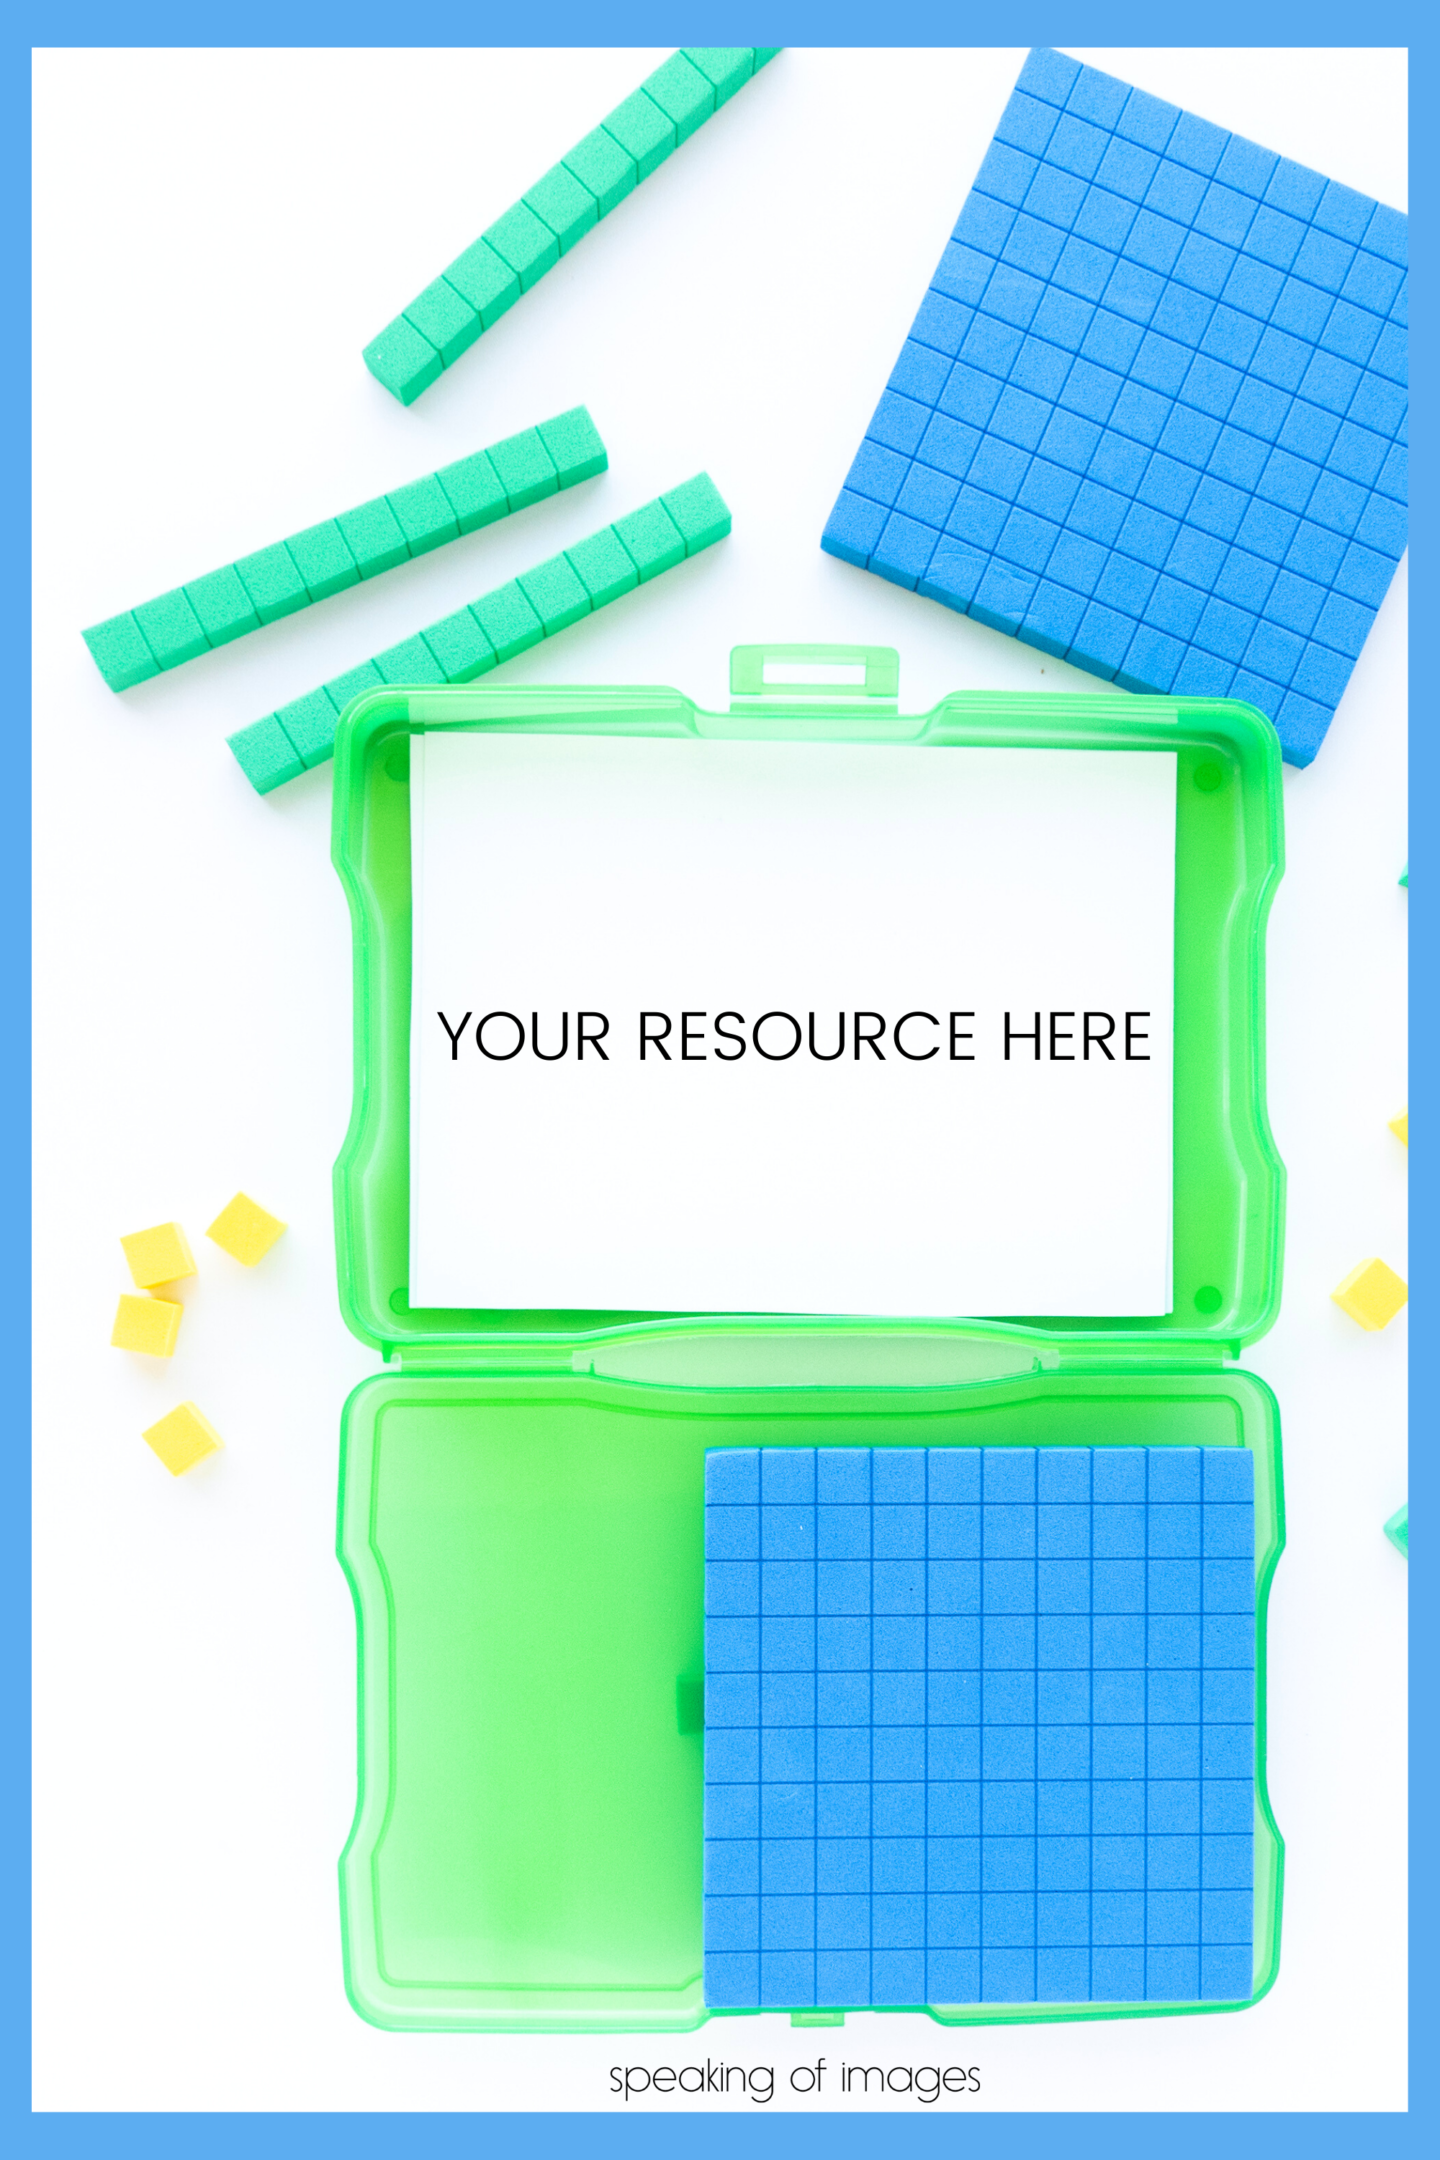 This photo is an example flat lay image with a birds eye view of the resource.